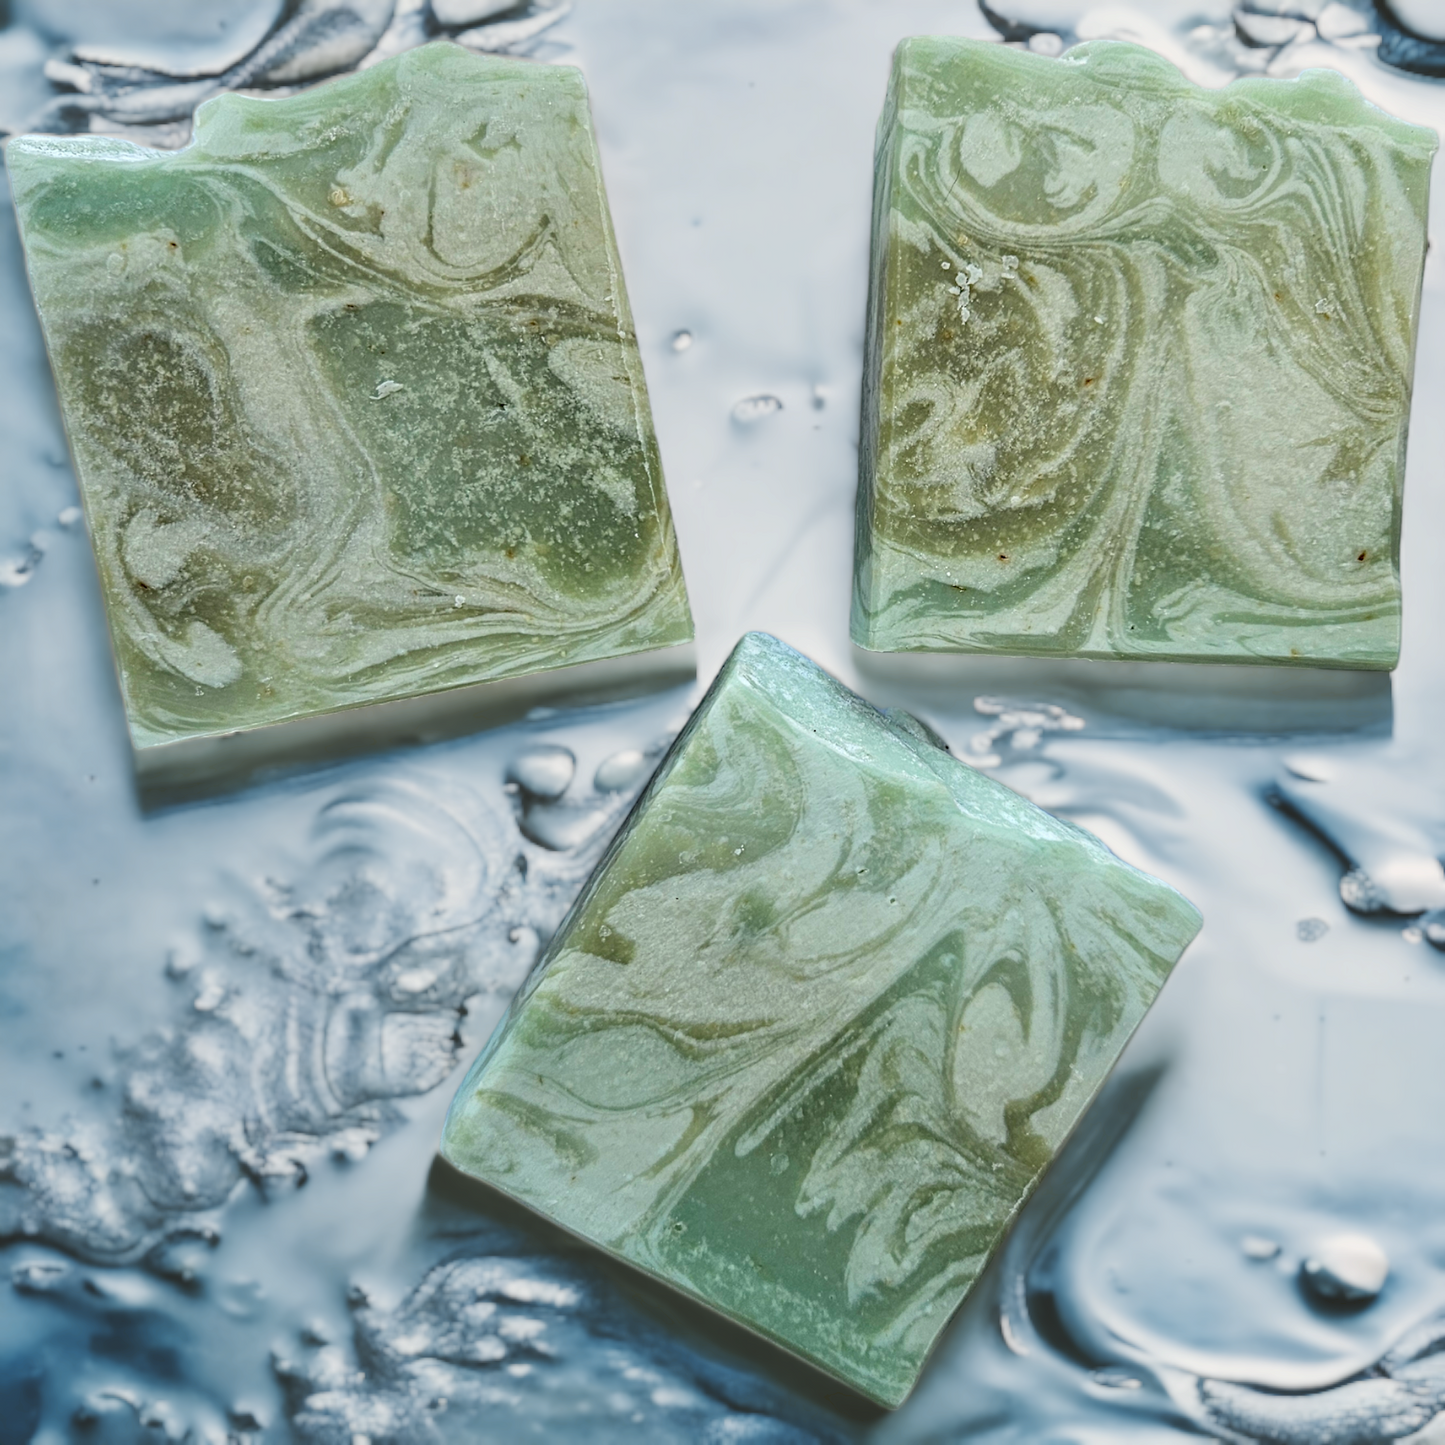 Rain Water - Cow and Goat Milk Soap